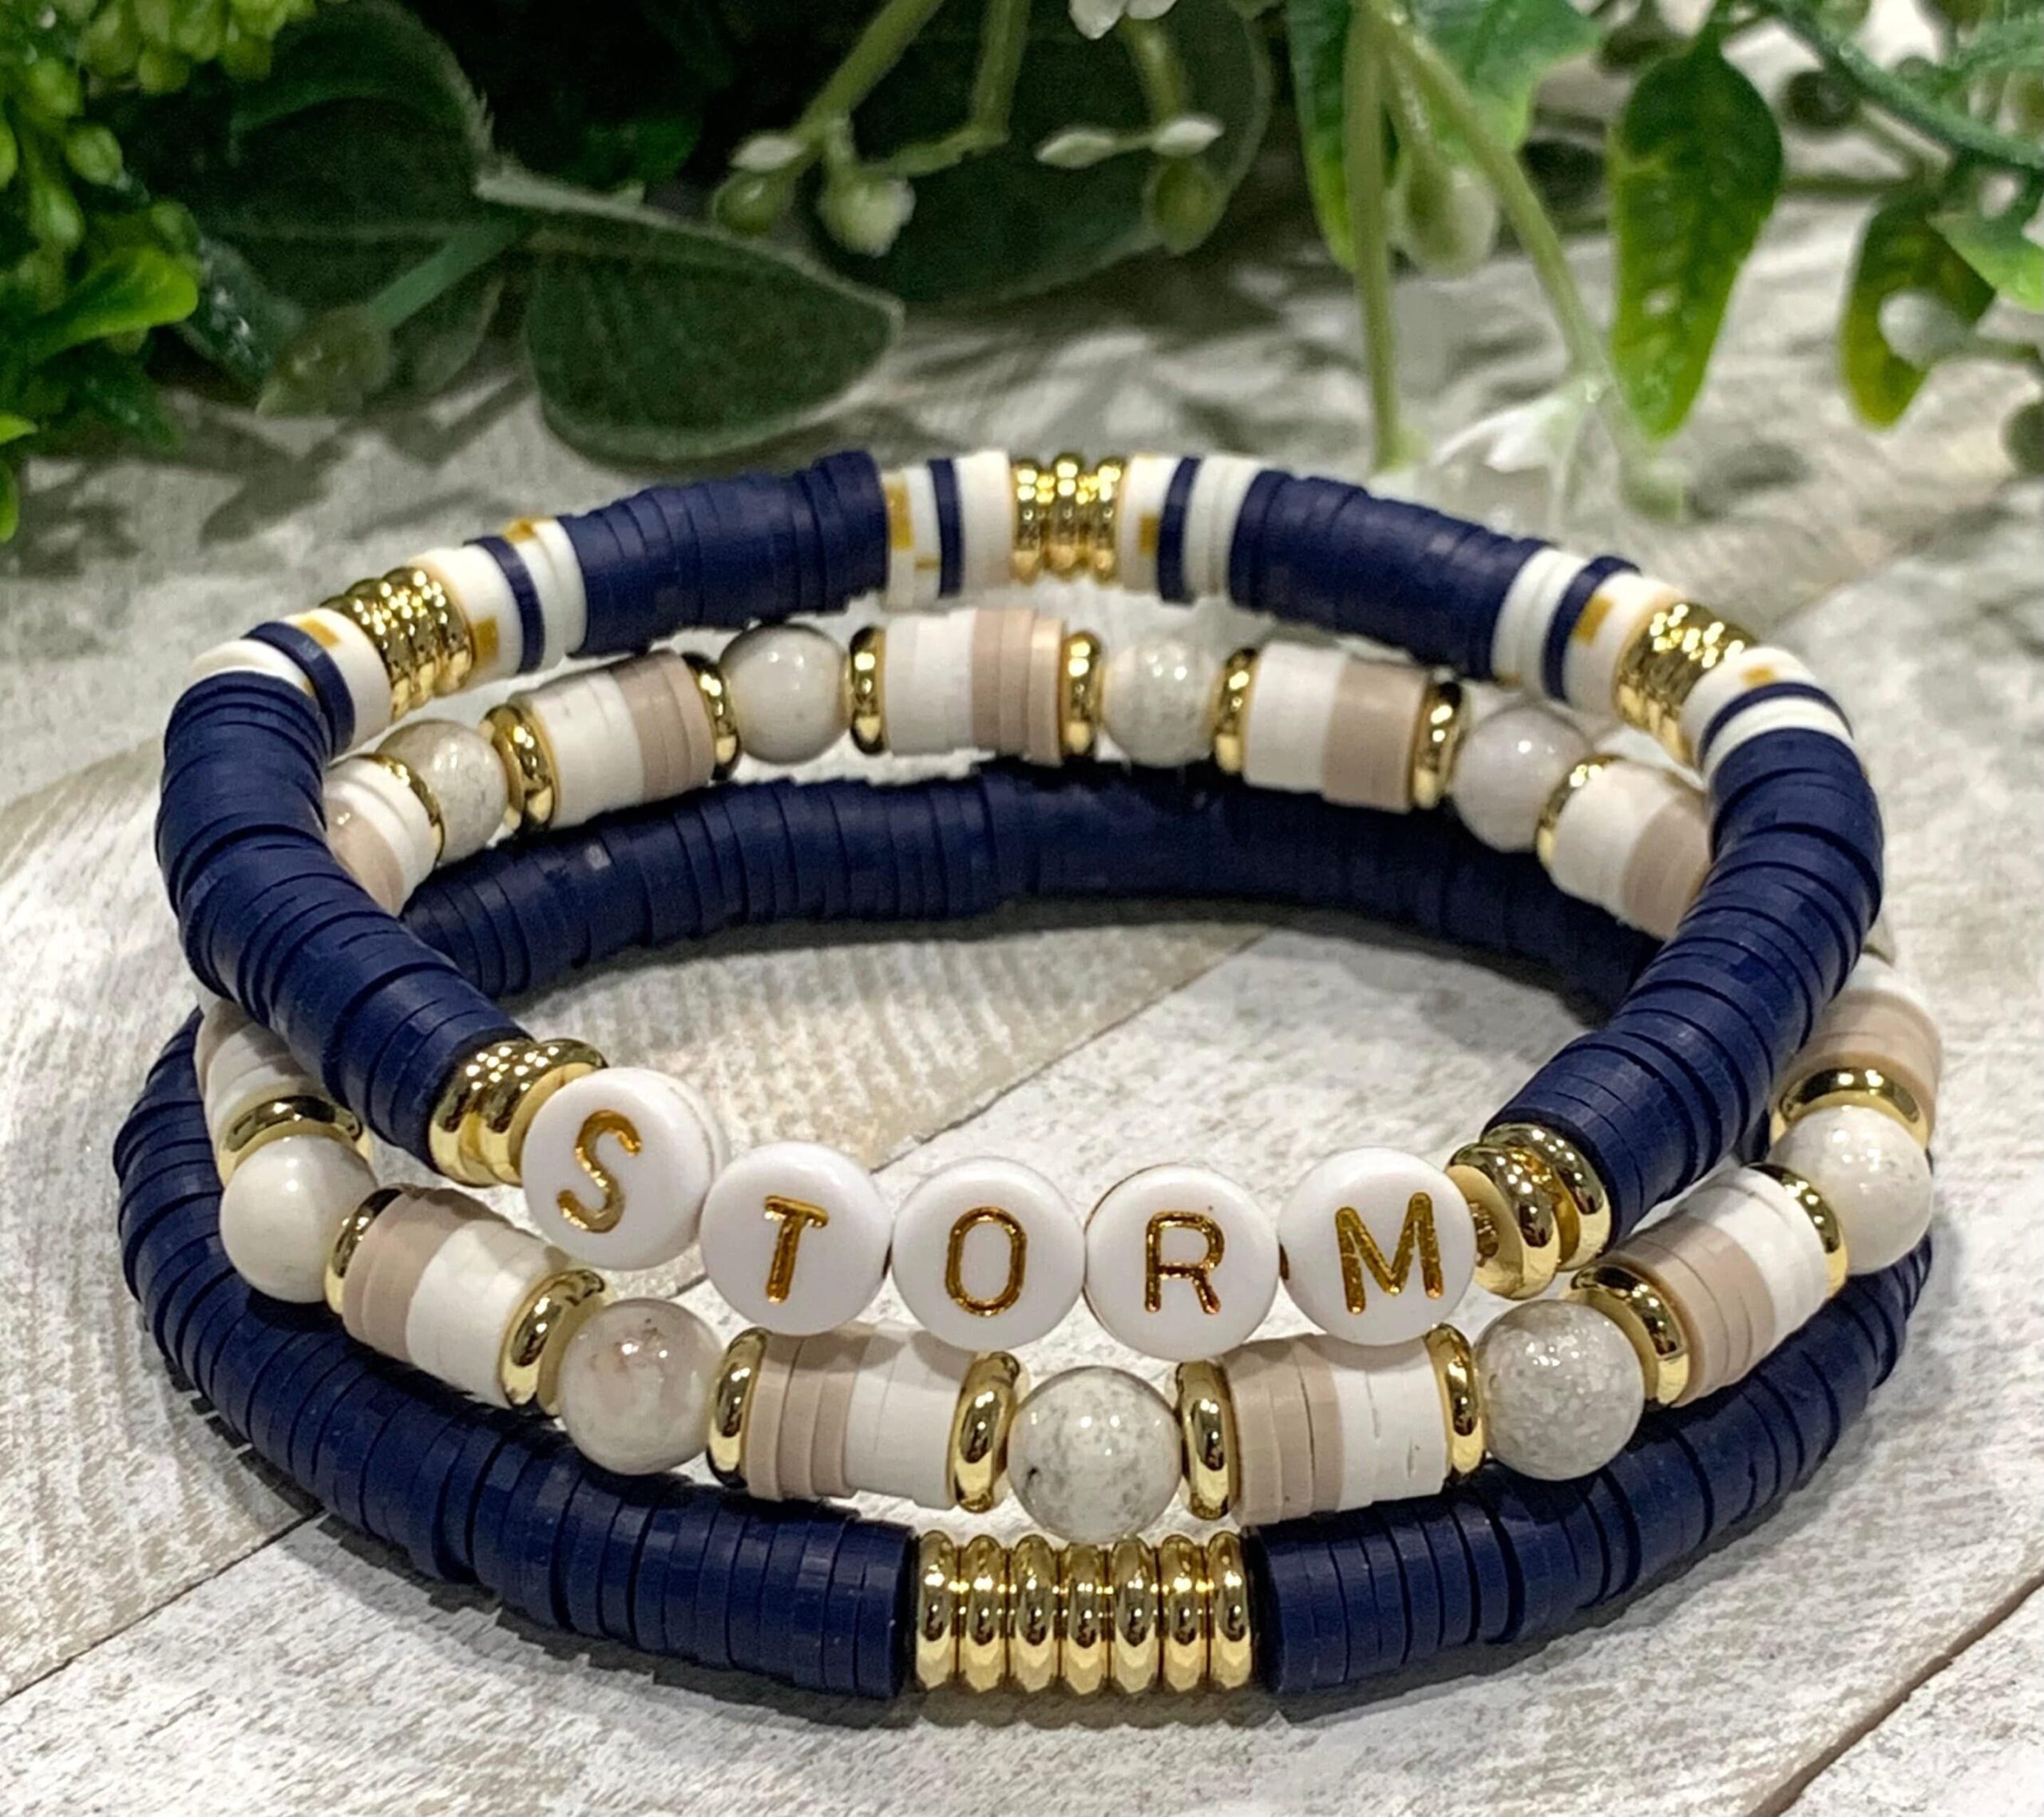 Choose for personalized bracelets for unique styles to show your love